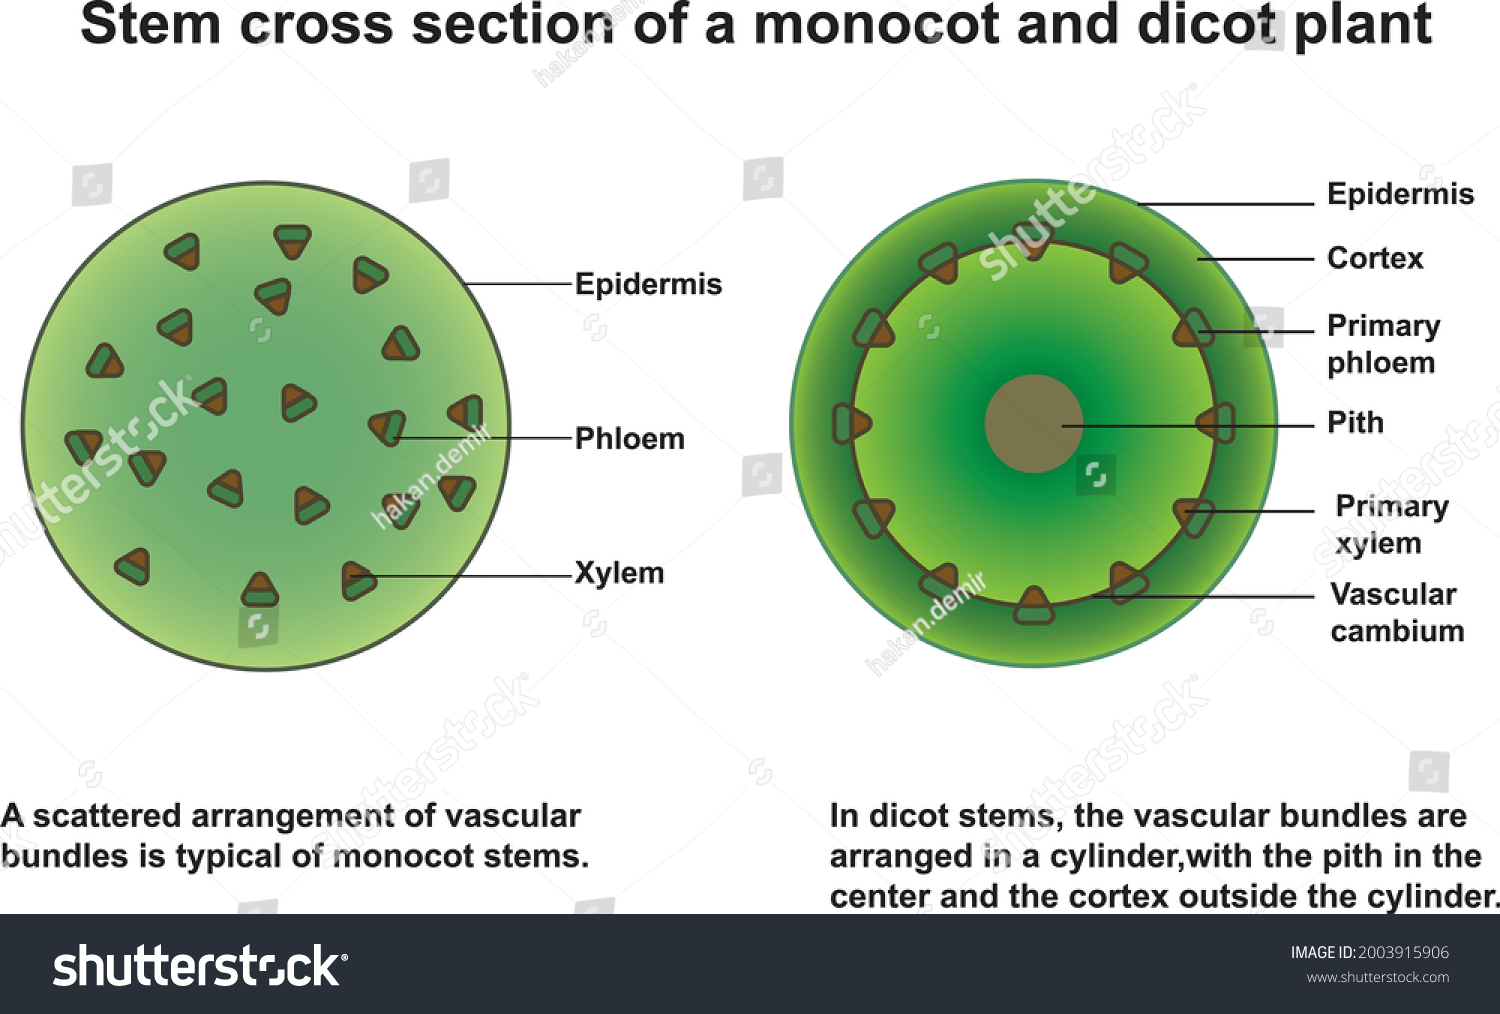 Stem cross section of monocot and dicot plant - Royalty Free Stock ...